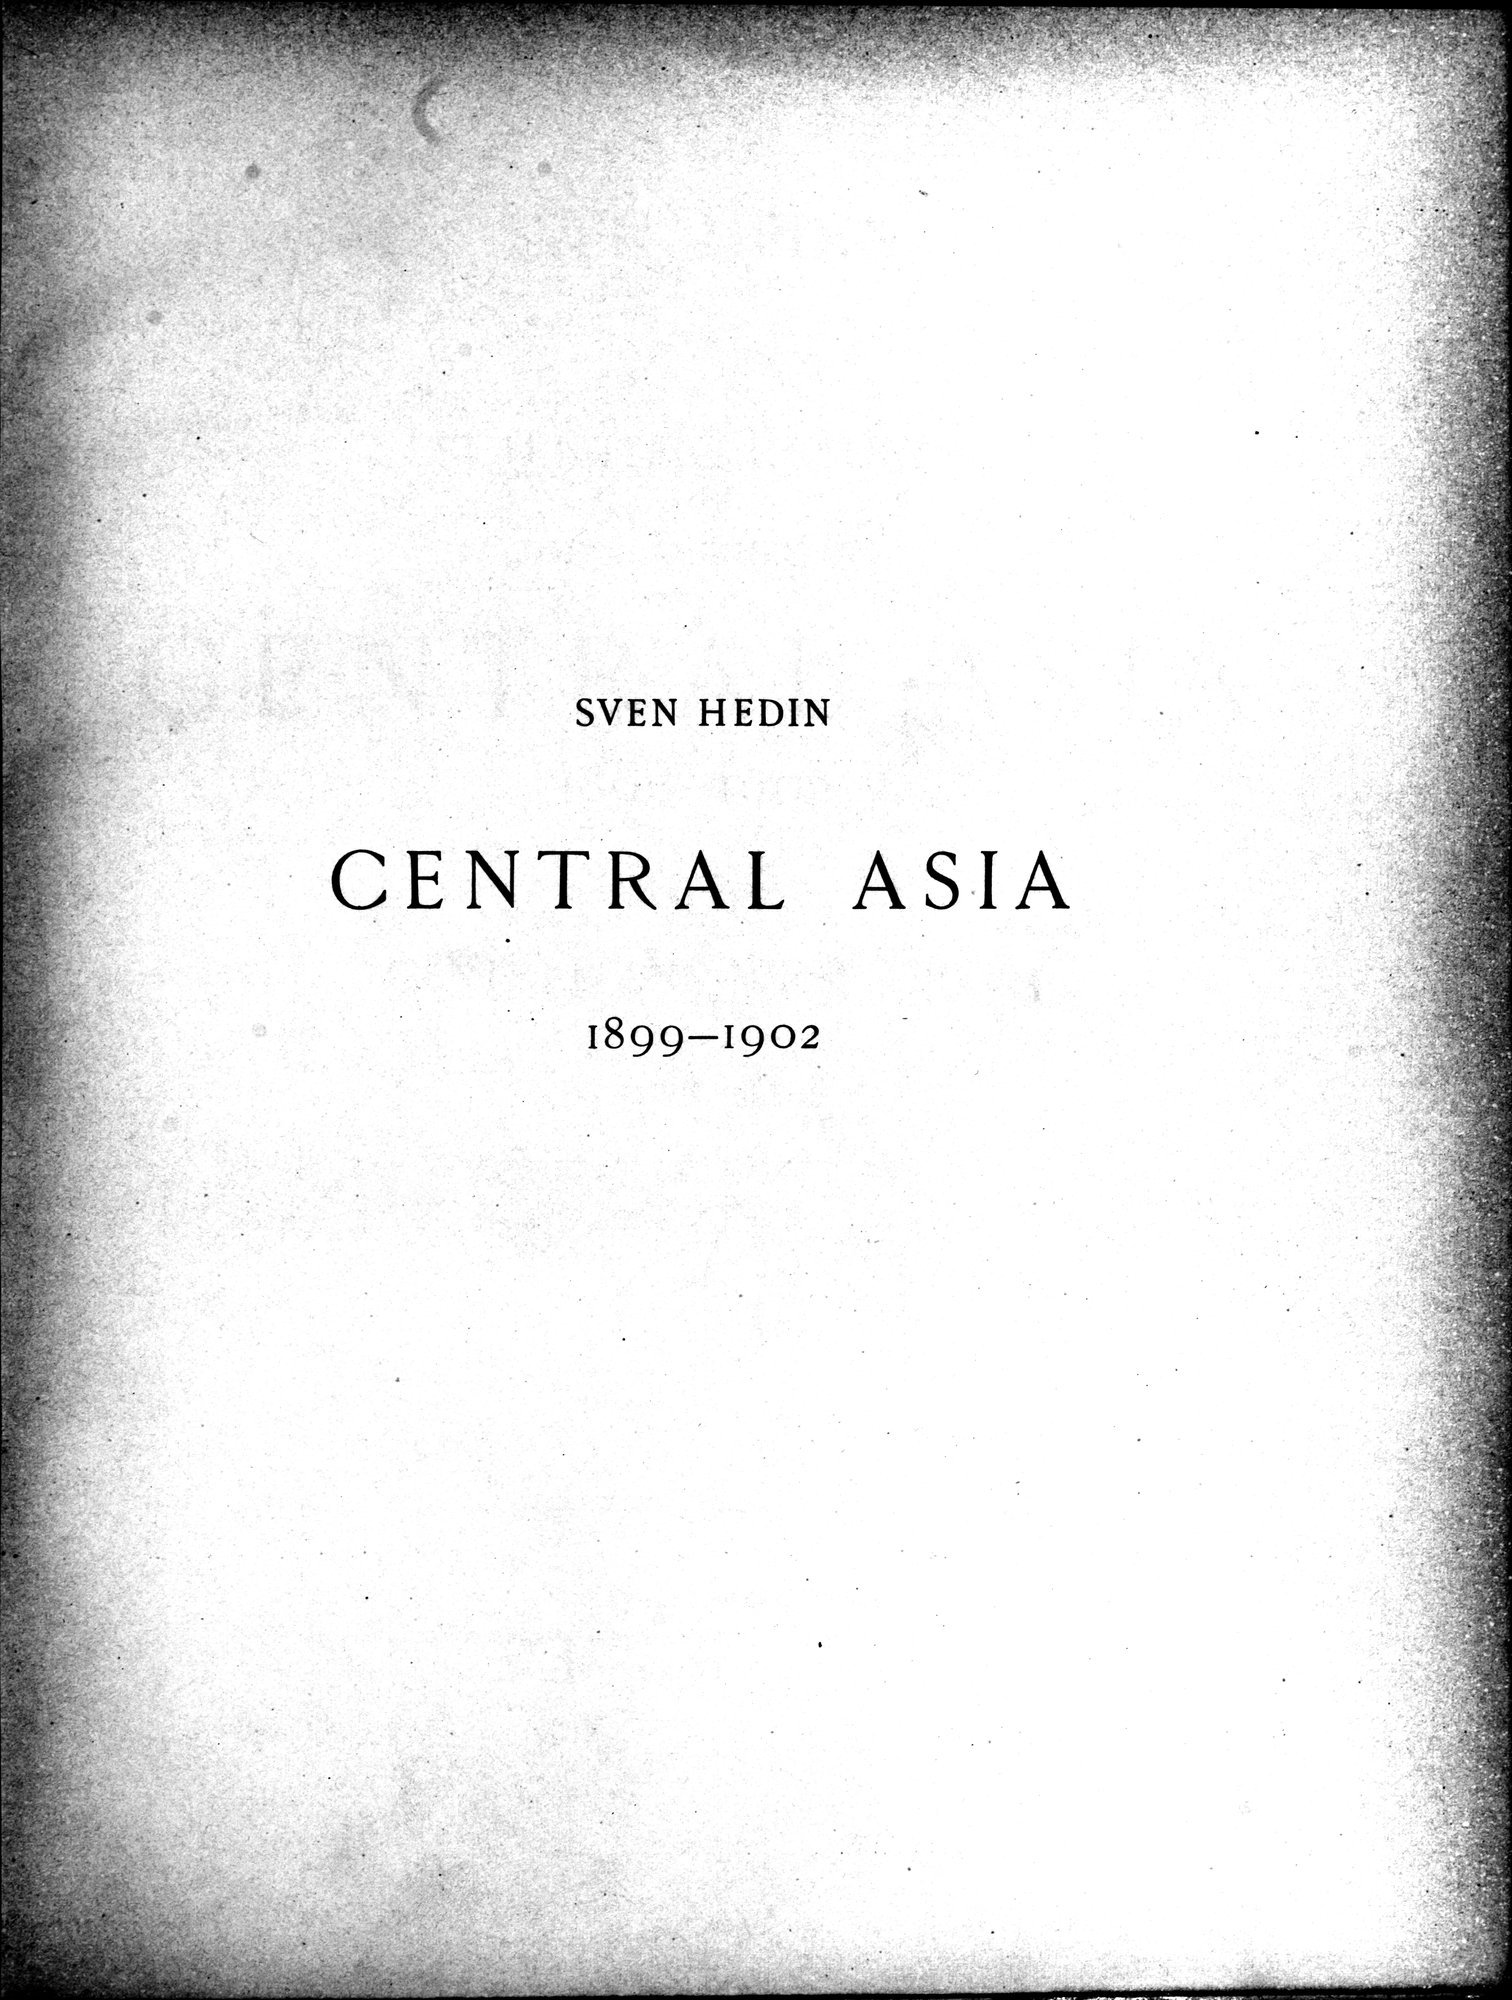 Scientific Results of a Journey in Central Asia, 1899-1902 : vol.4 / Page 7 (Grayscale High Resolution Image)